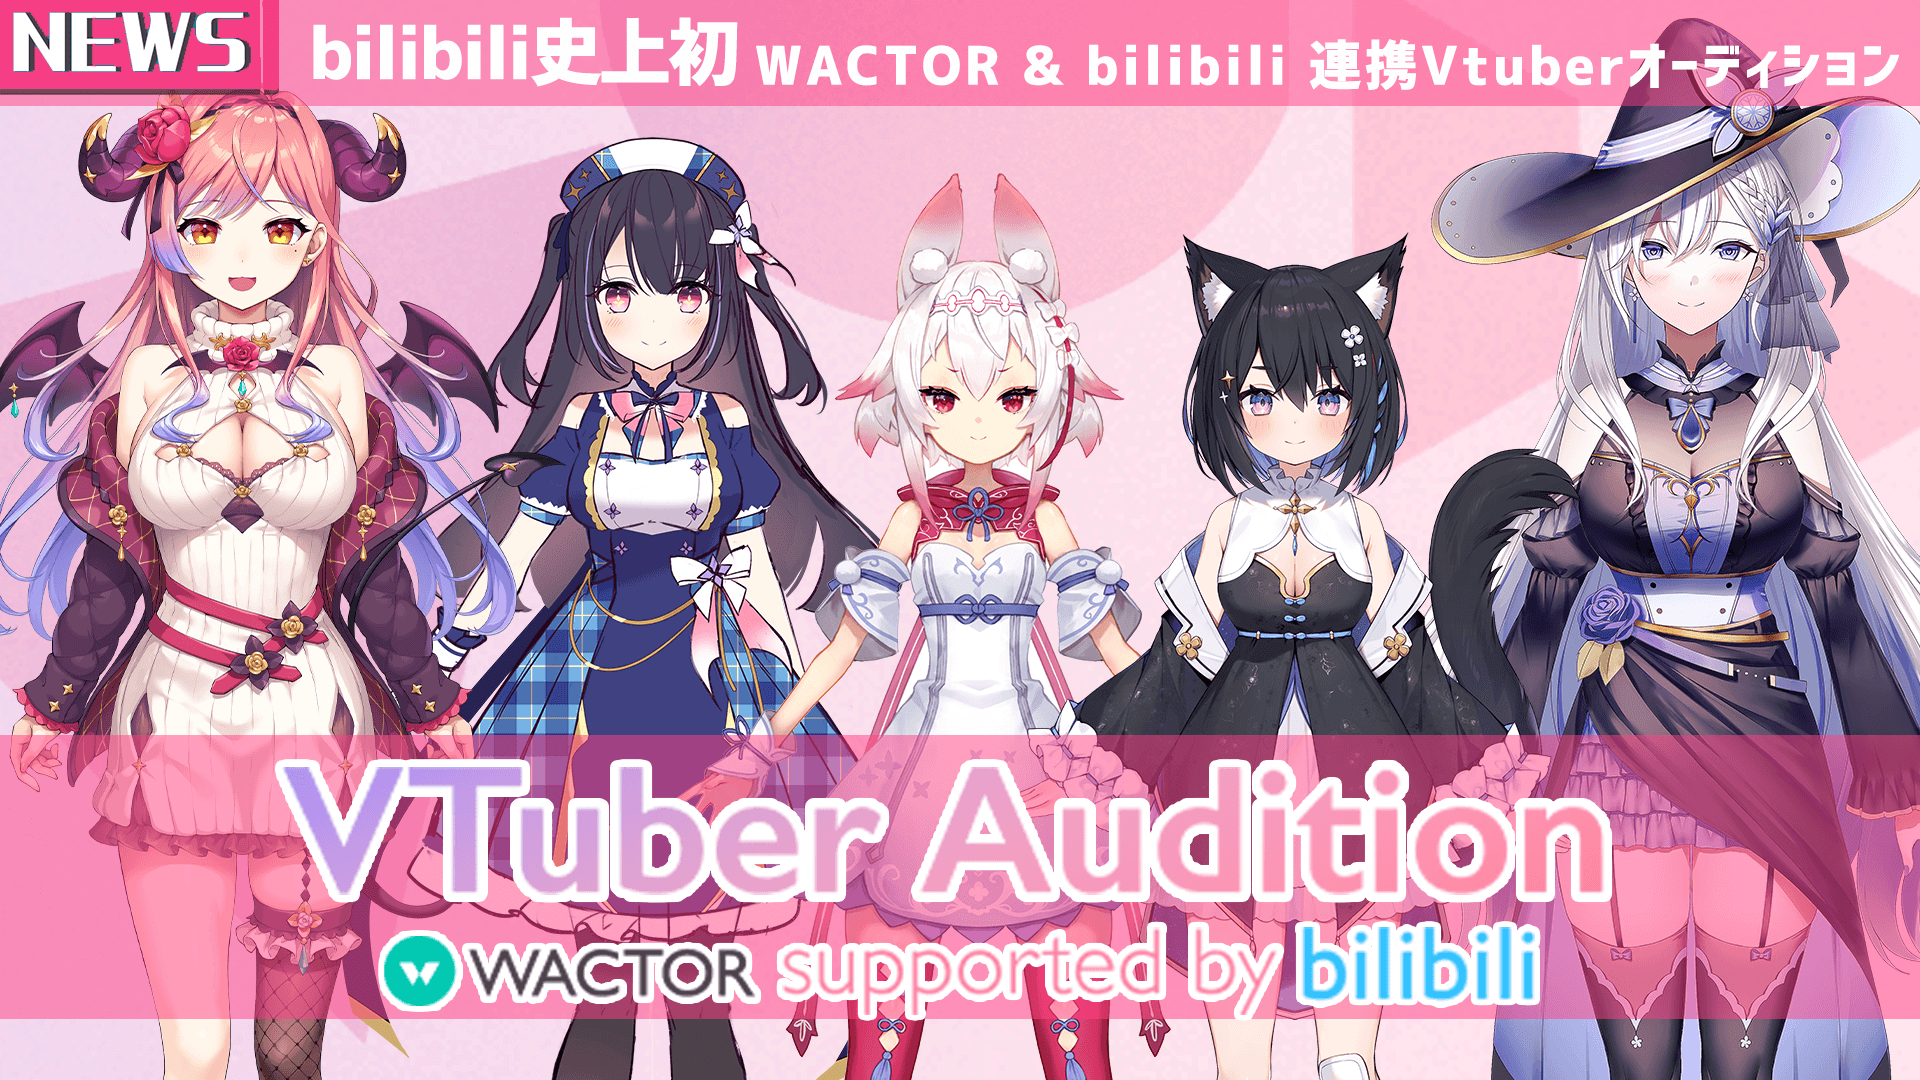 WACTOR VTuber Audition supported by bilibili (2)